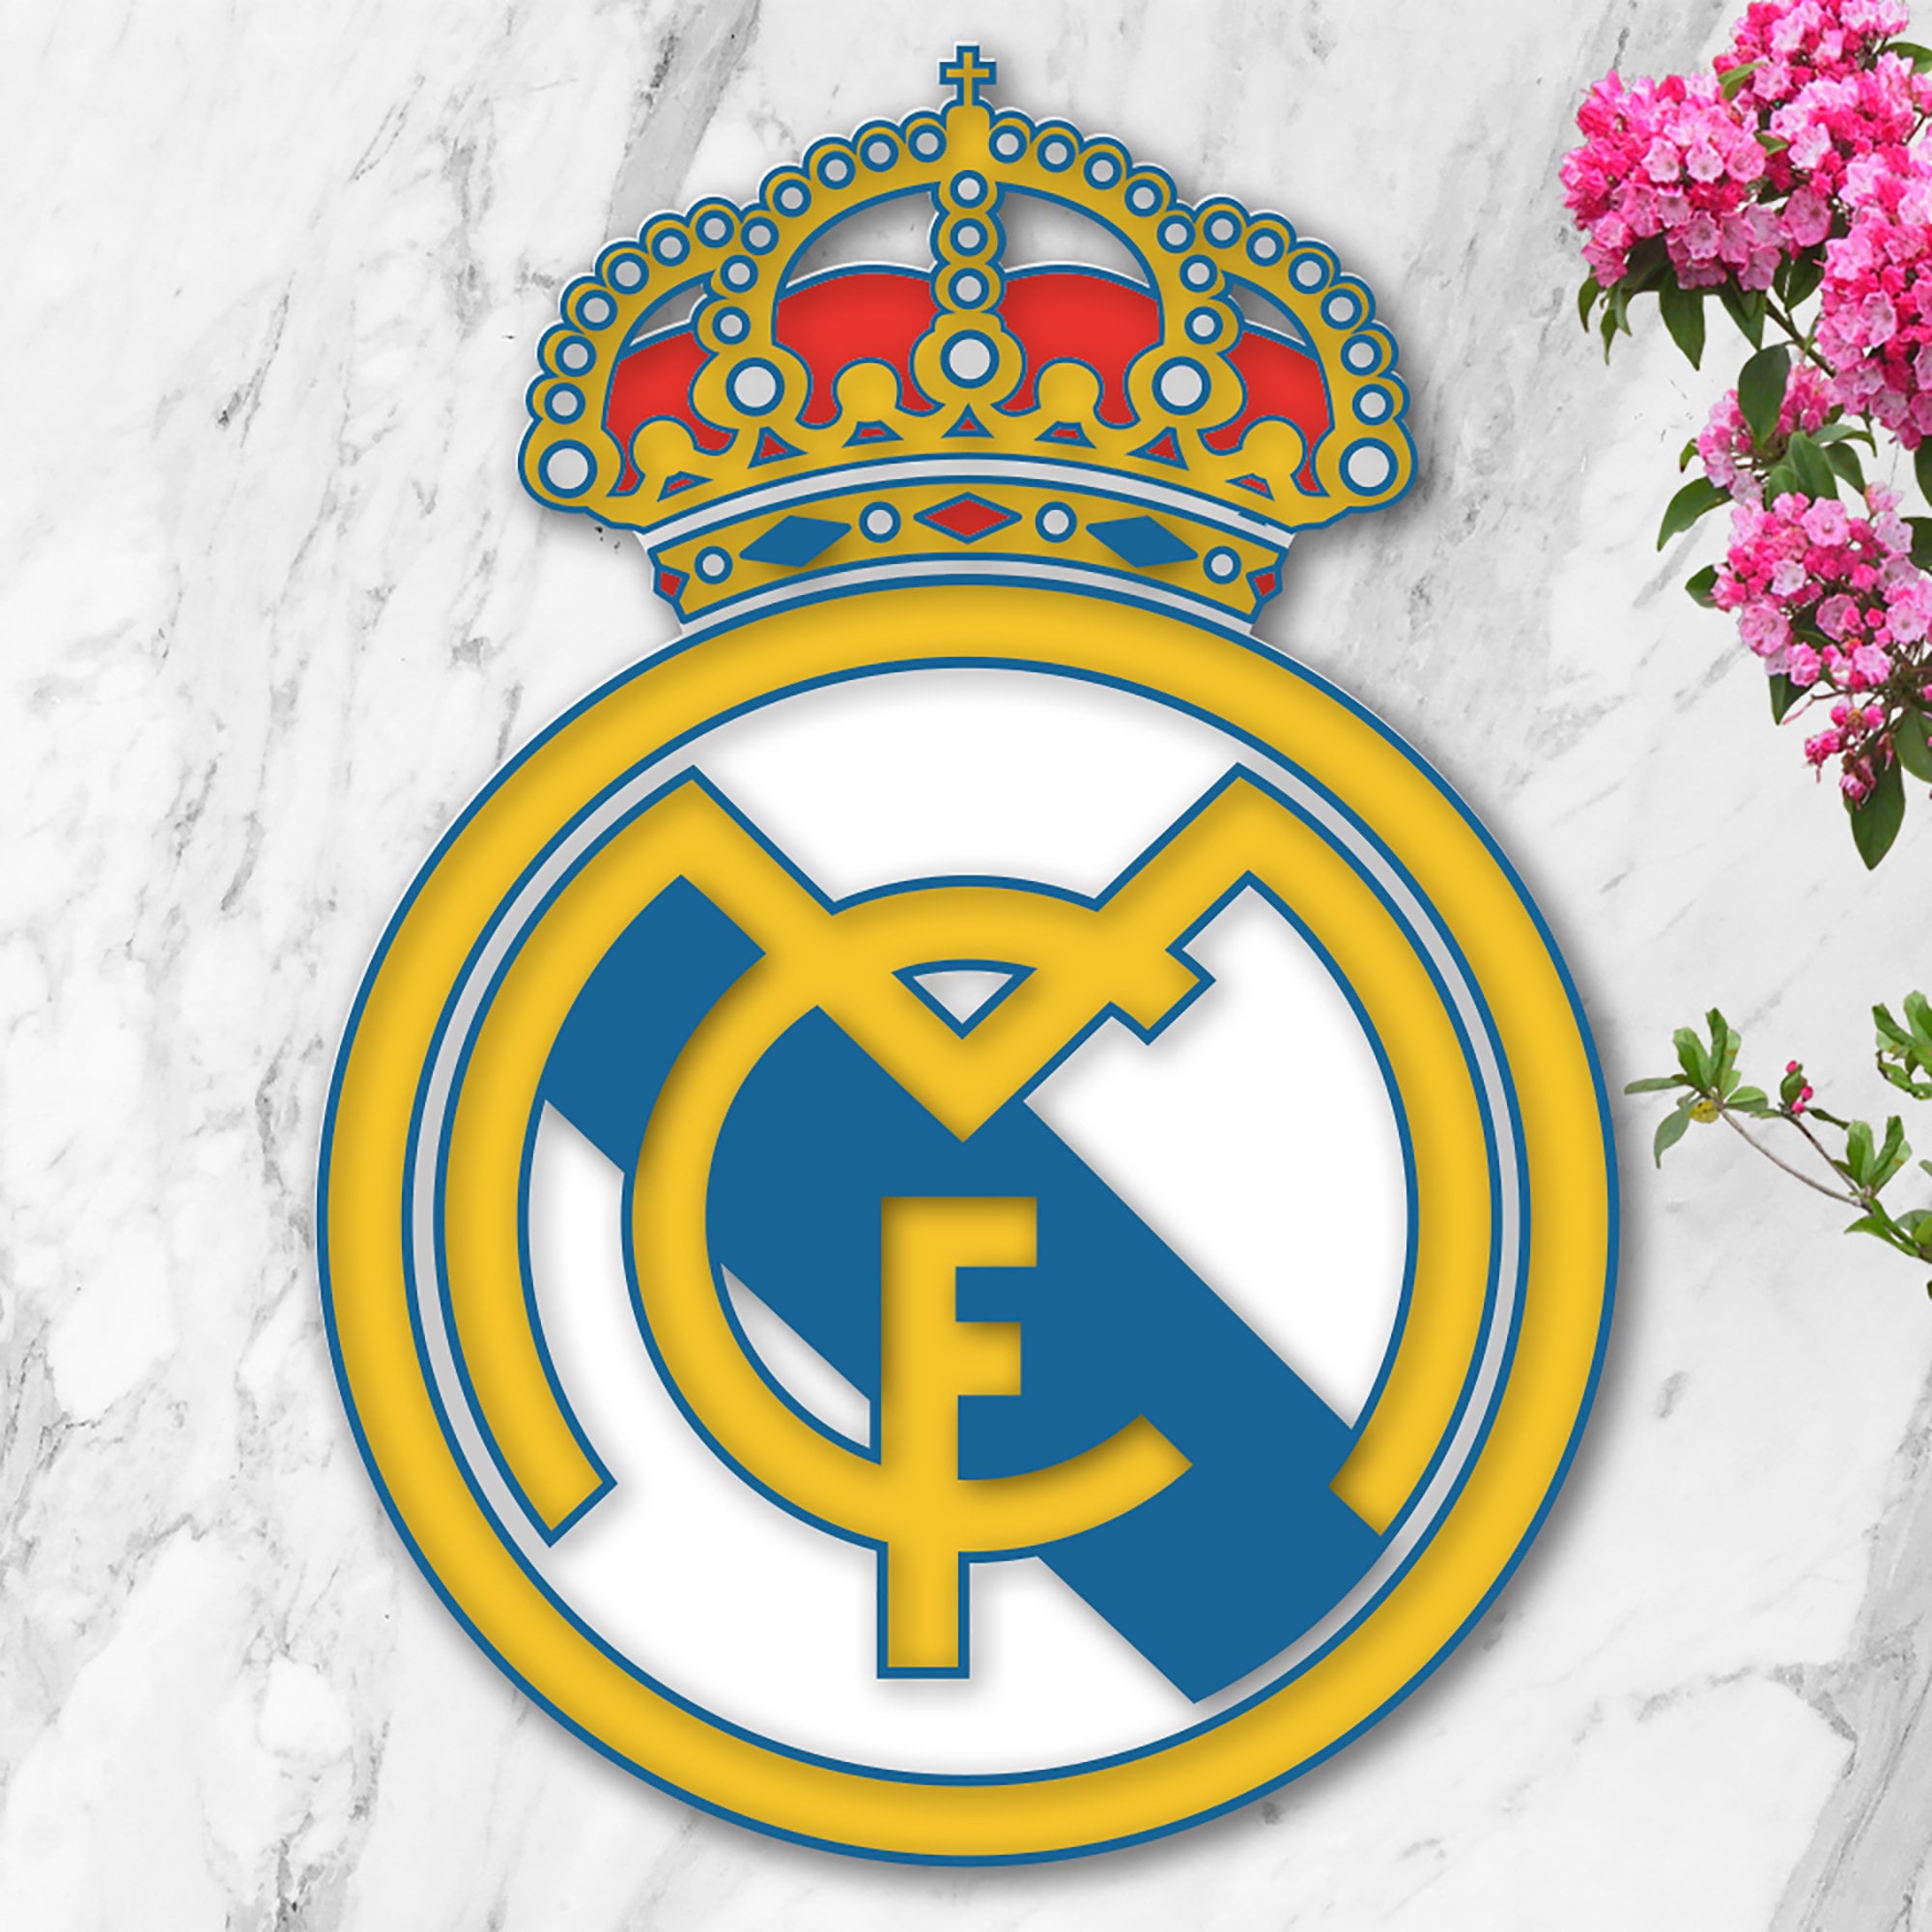 Real Madrid Crest Pin